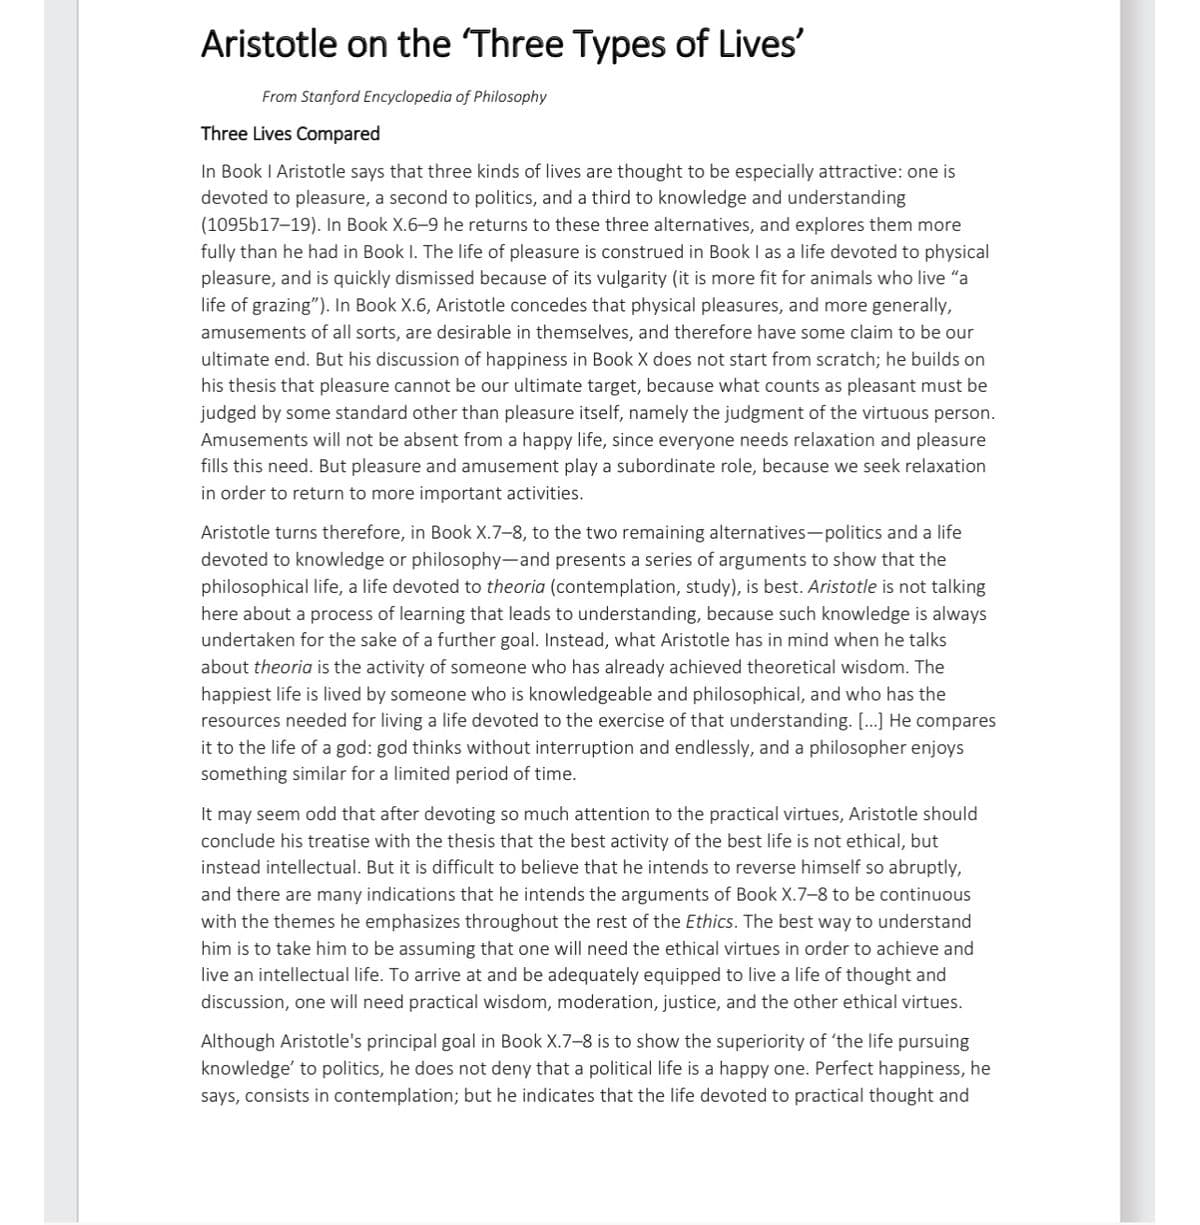 Aristotle on the 'Three Types of Lives'
From Stanford Encyclopedia of Philosophy
Three Lives Compared
In Book I Aristotle says that three kinds of lives are thought to be especially attractive: one is
devoted to pleasure, a second to politics, and a third to knowledge and understanding
(1095b17–19). In Book X.6-9 he returns to these three alternatives, and explores them more
fully than he had in Book I. The life of pleasure is construed in Book I as a life devoted to physical
pleasure, and is quickly dismissed because of its vulgarity (it is more fit for animals who live "a
life of grazing"). In Book X.6, Aristotle concedes that physical pleasures, and more generally,
amusements of all sorts, are desirable in themselves, and therefore have some claim to be our
ultimate end. But his discussion of happiness in Book X does not start from scratch; he builds on
his thesis that pleasure cannot be our ultimate target, because what counts as pleasant must be
judged by some standard other than pleasure itself, namely the judgment of the virtuous person.
Amusements will not be absent from a happy life, since everyone needs relaxation and pleasure
fills this need. But pleasure and amusement play a subordinate role, because we seek relaxation
in order to return to more important activities.
Aristotle turns therefore, in Book X.7-8, to the two remaining alternatives-politics and a life
devoted to knowledge or philosophy-and presents a series of arguments to show that the
philosophical life, a life devoted to theoria (contemplation, study), is best. Aristotle is not talking
here about a process of learning that leads to understanding, because such knowledge is always
undertaken for the sake of a further goal. Instead, what Aristotle has in mind when he talks
about theoria is the activity of someone who has already achieved theoretical wisdom. The
happiest life is lived by someone who is knowledgeable and philosophical, and who has the
resources needed for living a life devoted to the exercise of that understanding. [...] He compares
it to the life of a god: god thinks without interruption and endlessly, and a philosopher enjoys
something similar for a limited period of time.
It may seem odd that after devoting so much attention to the practical virtues, Aristotle should
conclude his treatise with the thesis that the best activity of the best life is not ethical, but
instead intellectual. But it is difficult to believe that he intends to reverse himself so abruptly,
and there are many indications that he intends the arguments of Book X.7-8 to be continuous
with the themes he emphasizes throughout the rest of the Ethics. The best way to understand
him is to take him to be assuming that one will need the ethical virtues in order to achieve and
live an intellectual life. To arrive at and be adequately equipped to live a life of thought and
discussion, one will need practical wisdom, moderation, justice, and the other ethical virtues.
Although Aristotle's principal goal in Book X.7-8 is to show the superiority of 'the life pursuing
knowledge' to politics, he does not deny that a political life is a happy one. Perfect happiness, he
says, consists in contemplation; but he indicates that the life devoted to practical thought and